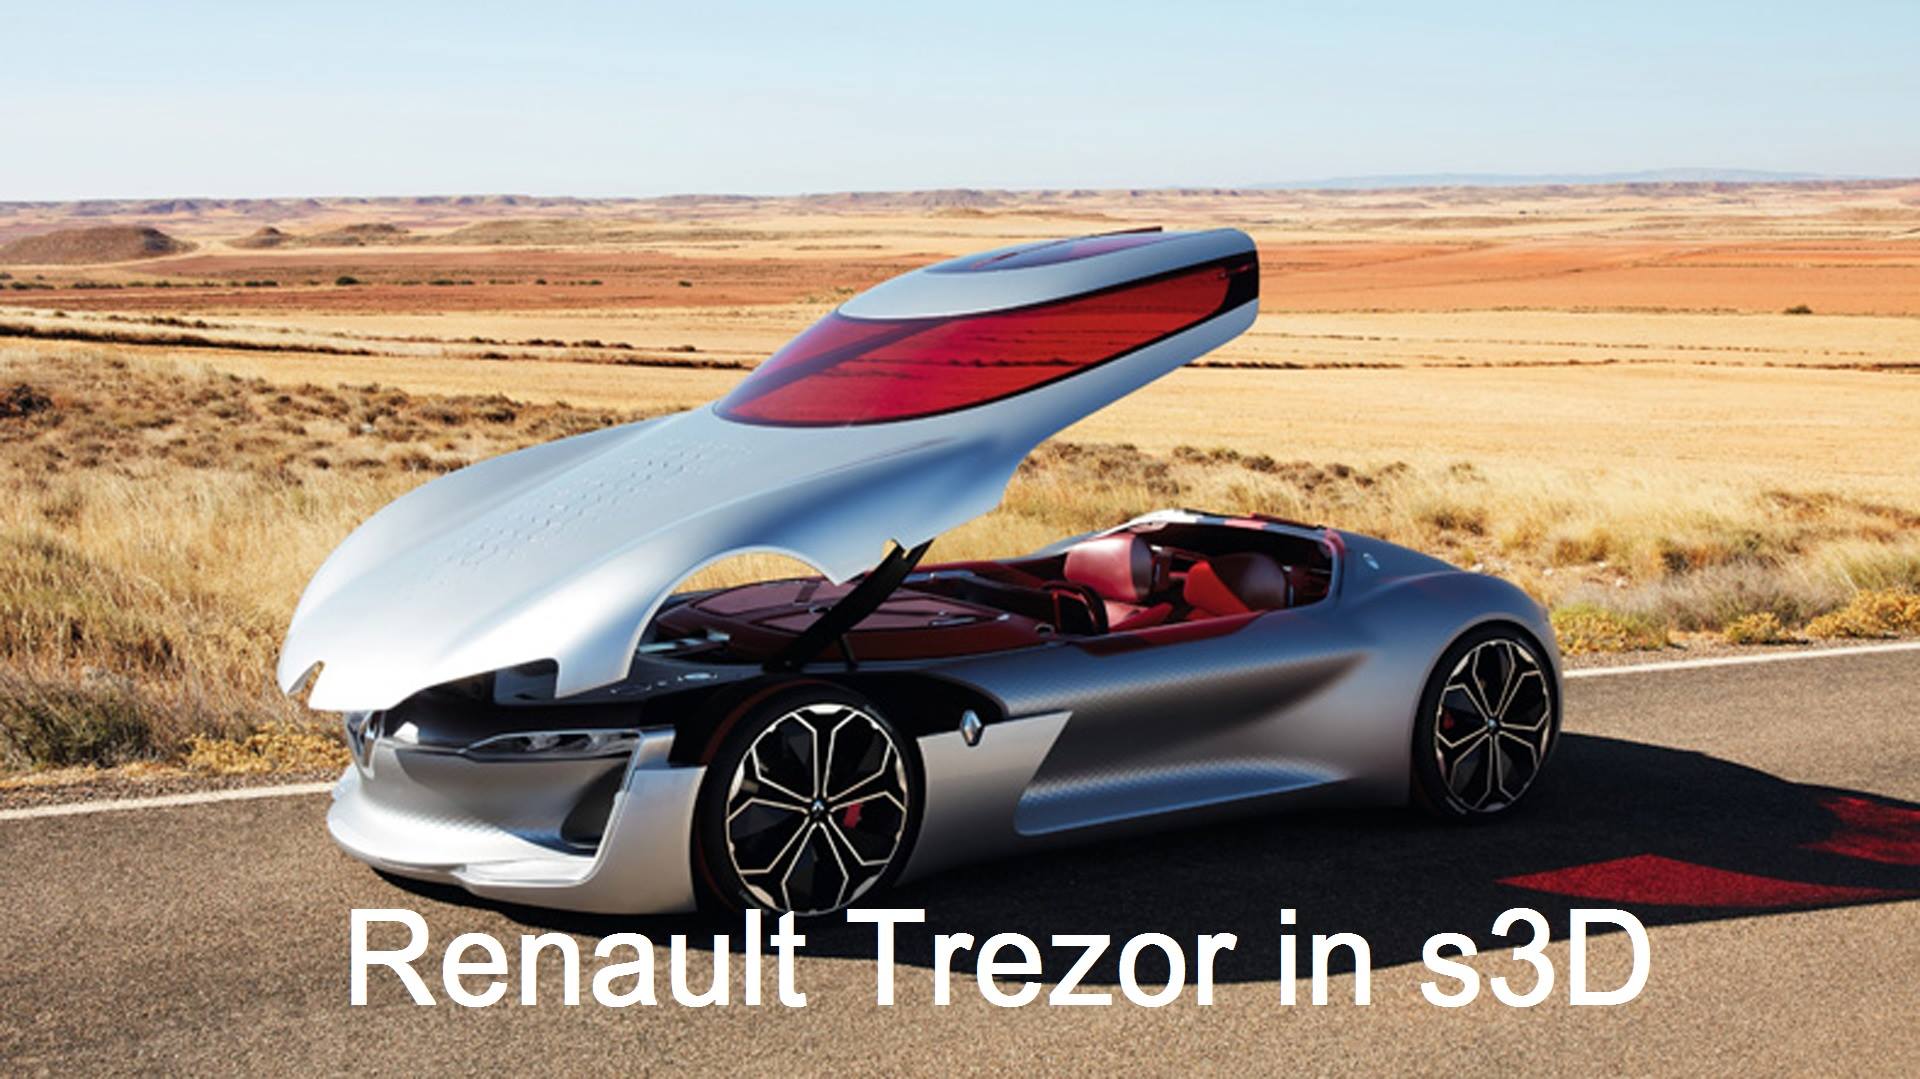 Renault Trezor Exterior and Interior in 3D